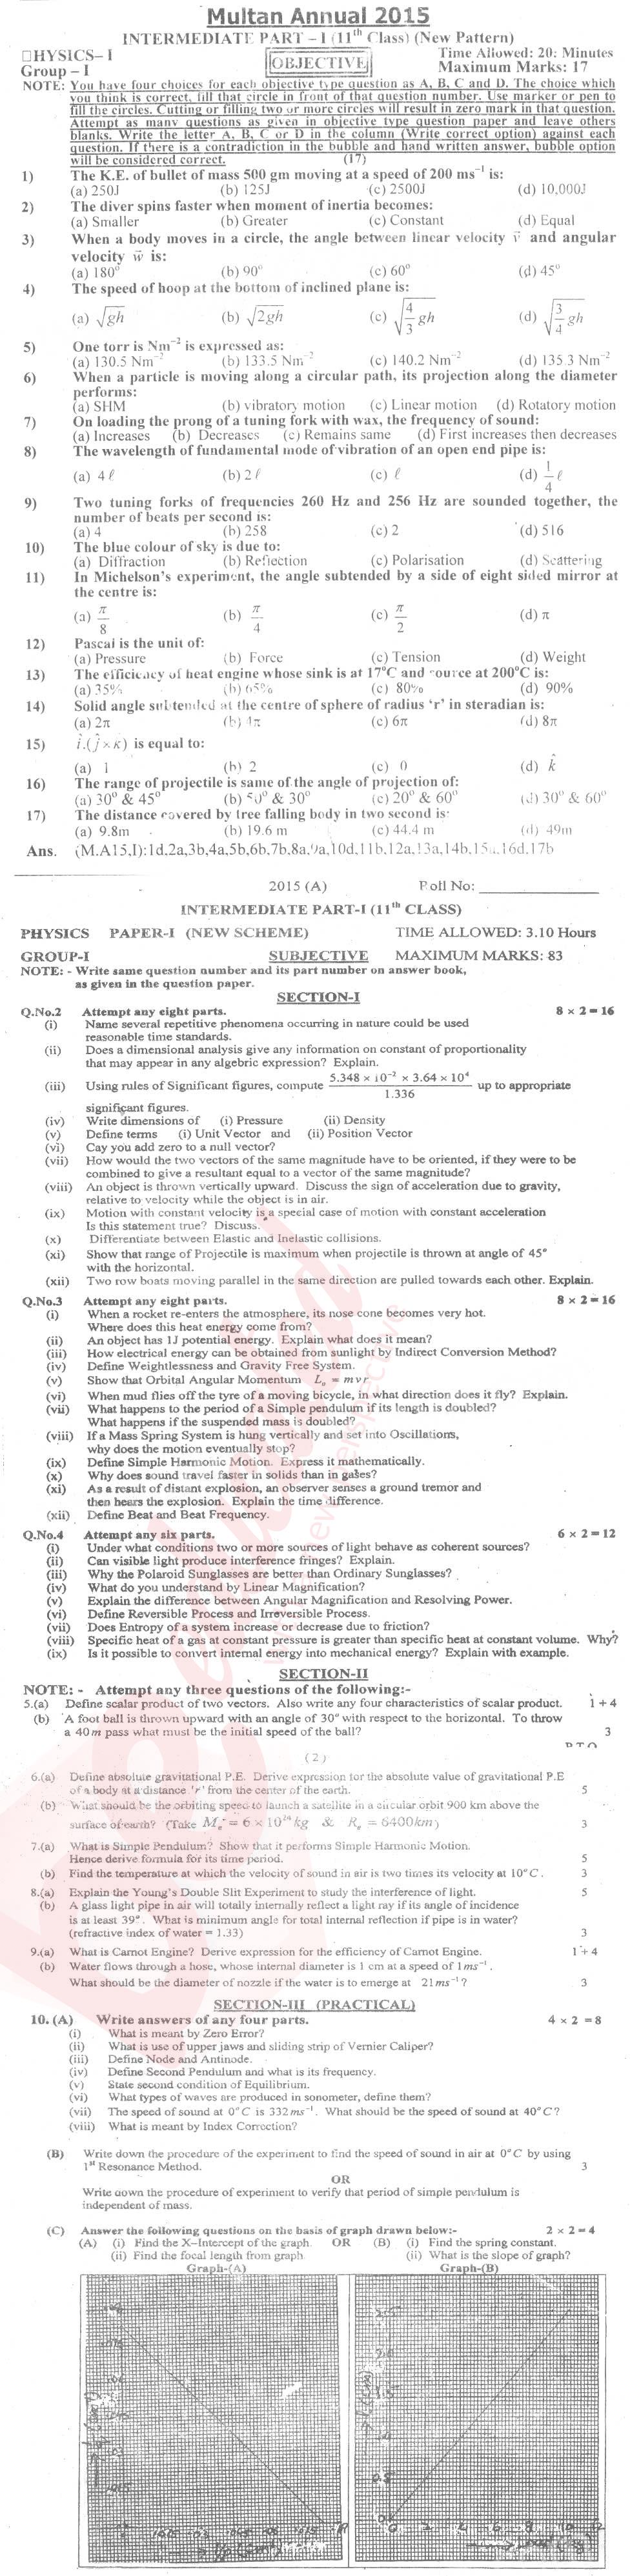 Physics 11th class Past Paper Group 1 BISE Multan 2015